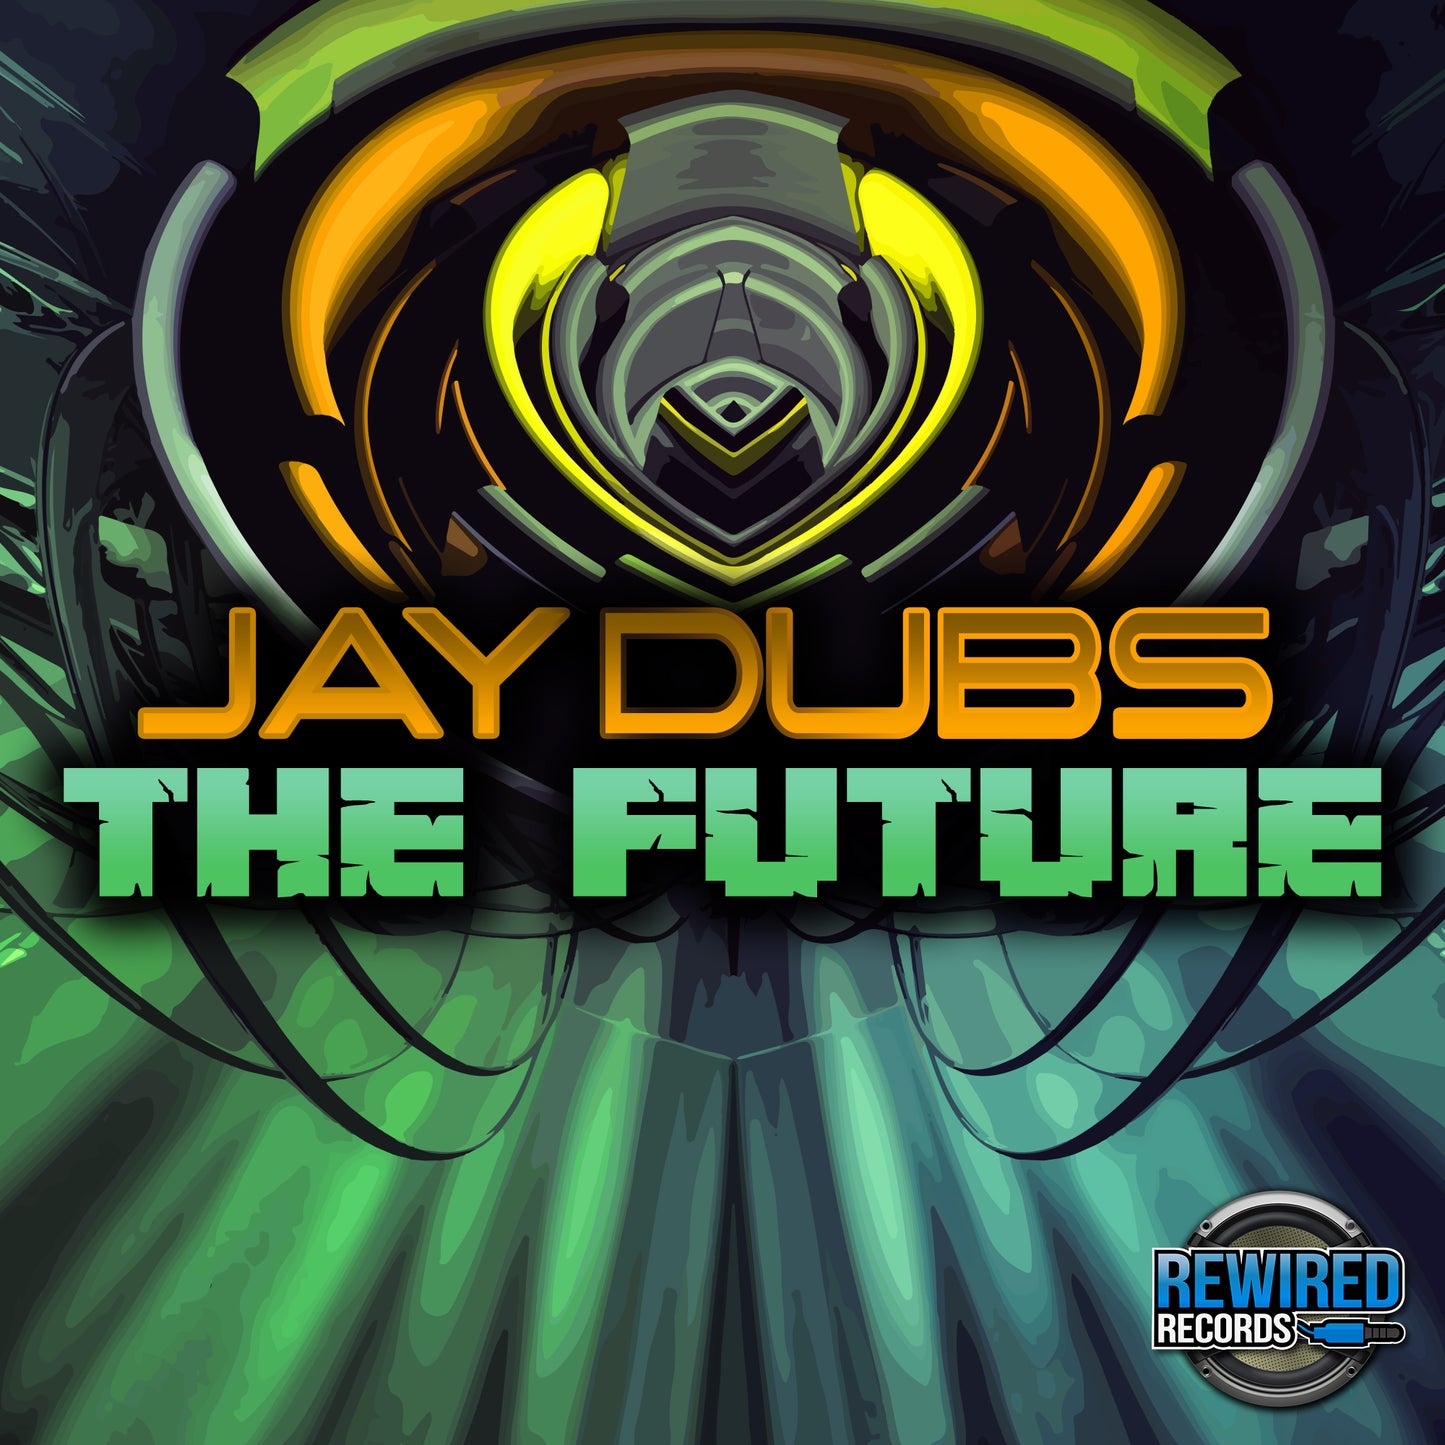 Jay Dubs - The Future - Rewired Records